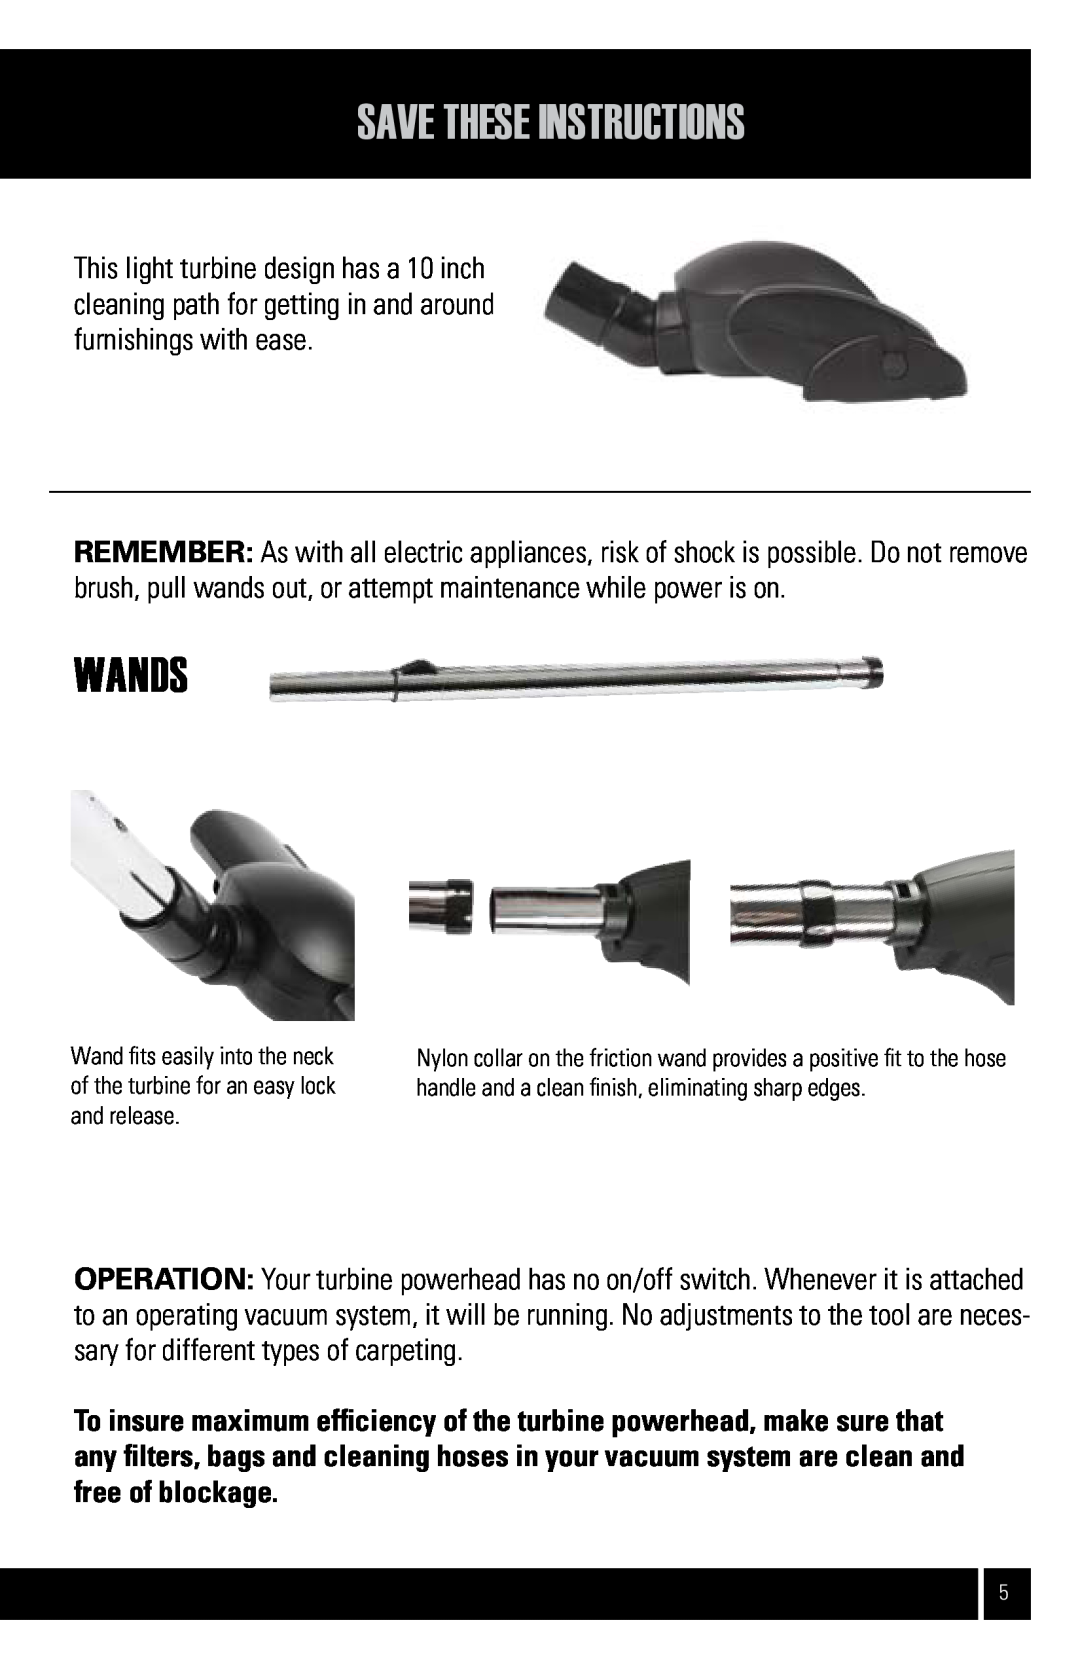 Air King CVS-11T manual wands, Save These Instructions 